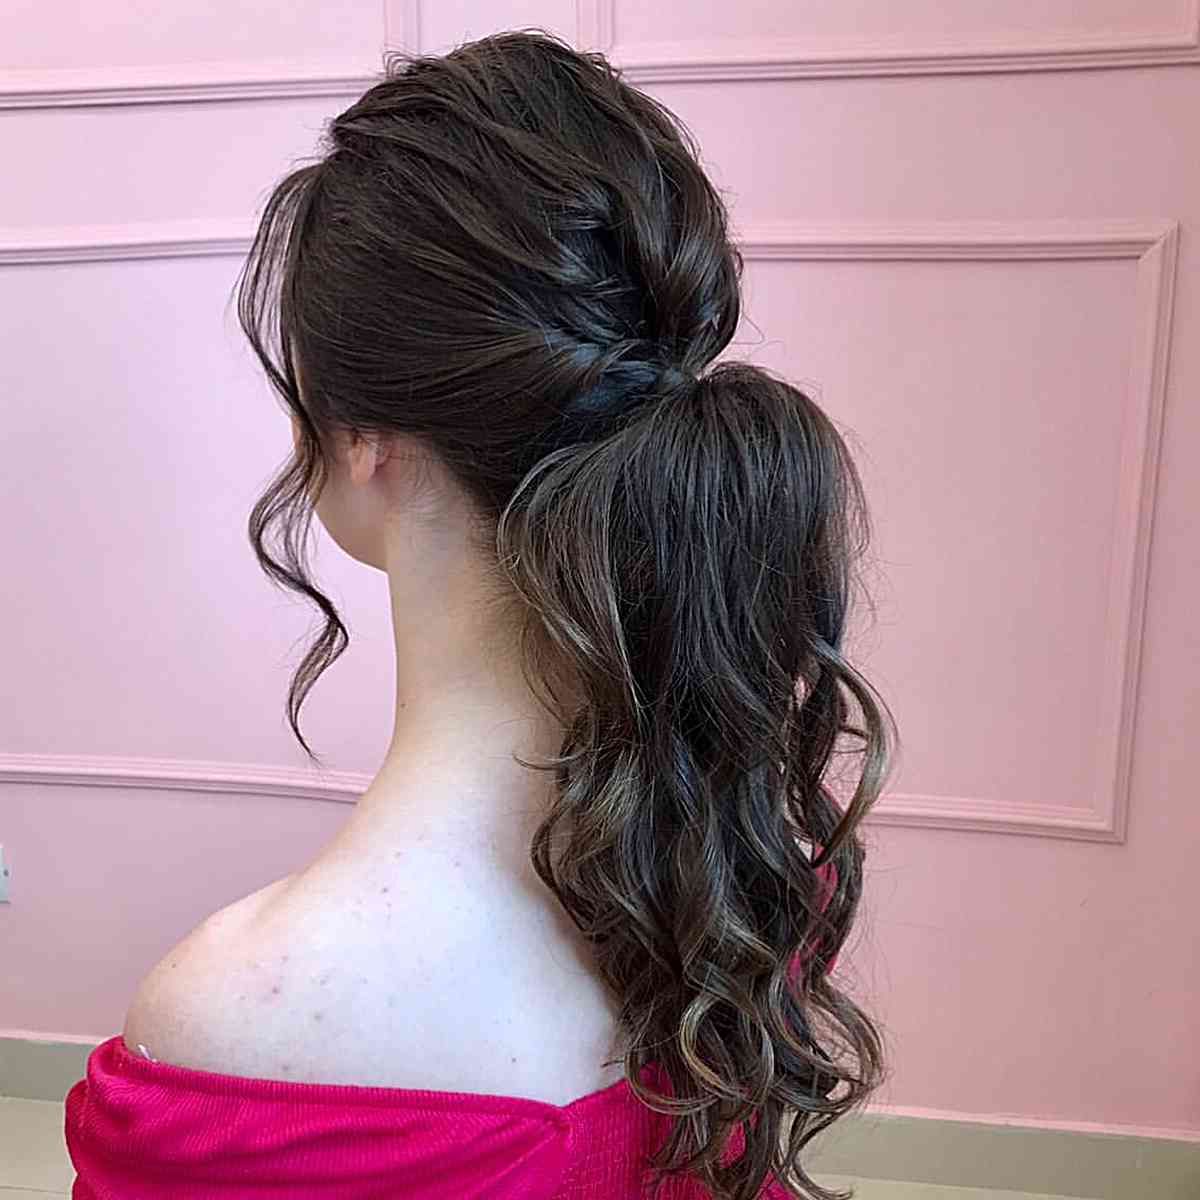 33 Cutest Prom Ponytail Hairstyles That Are Easy To Do! Throughout Preferred Chic Ponytail Updo For Long Curly Hair (View 8 of 15)